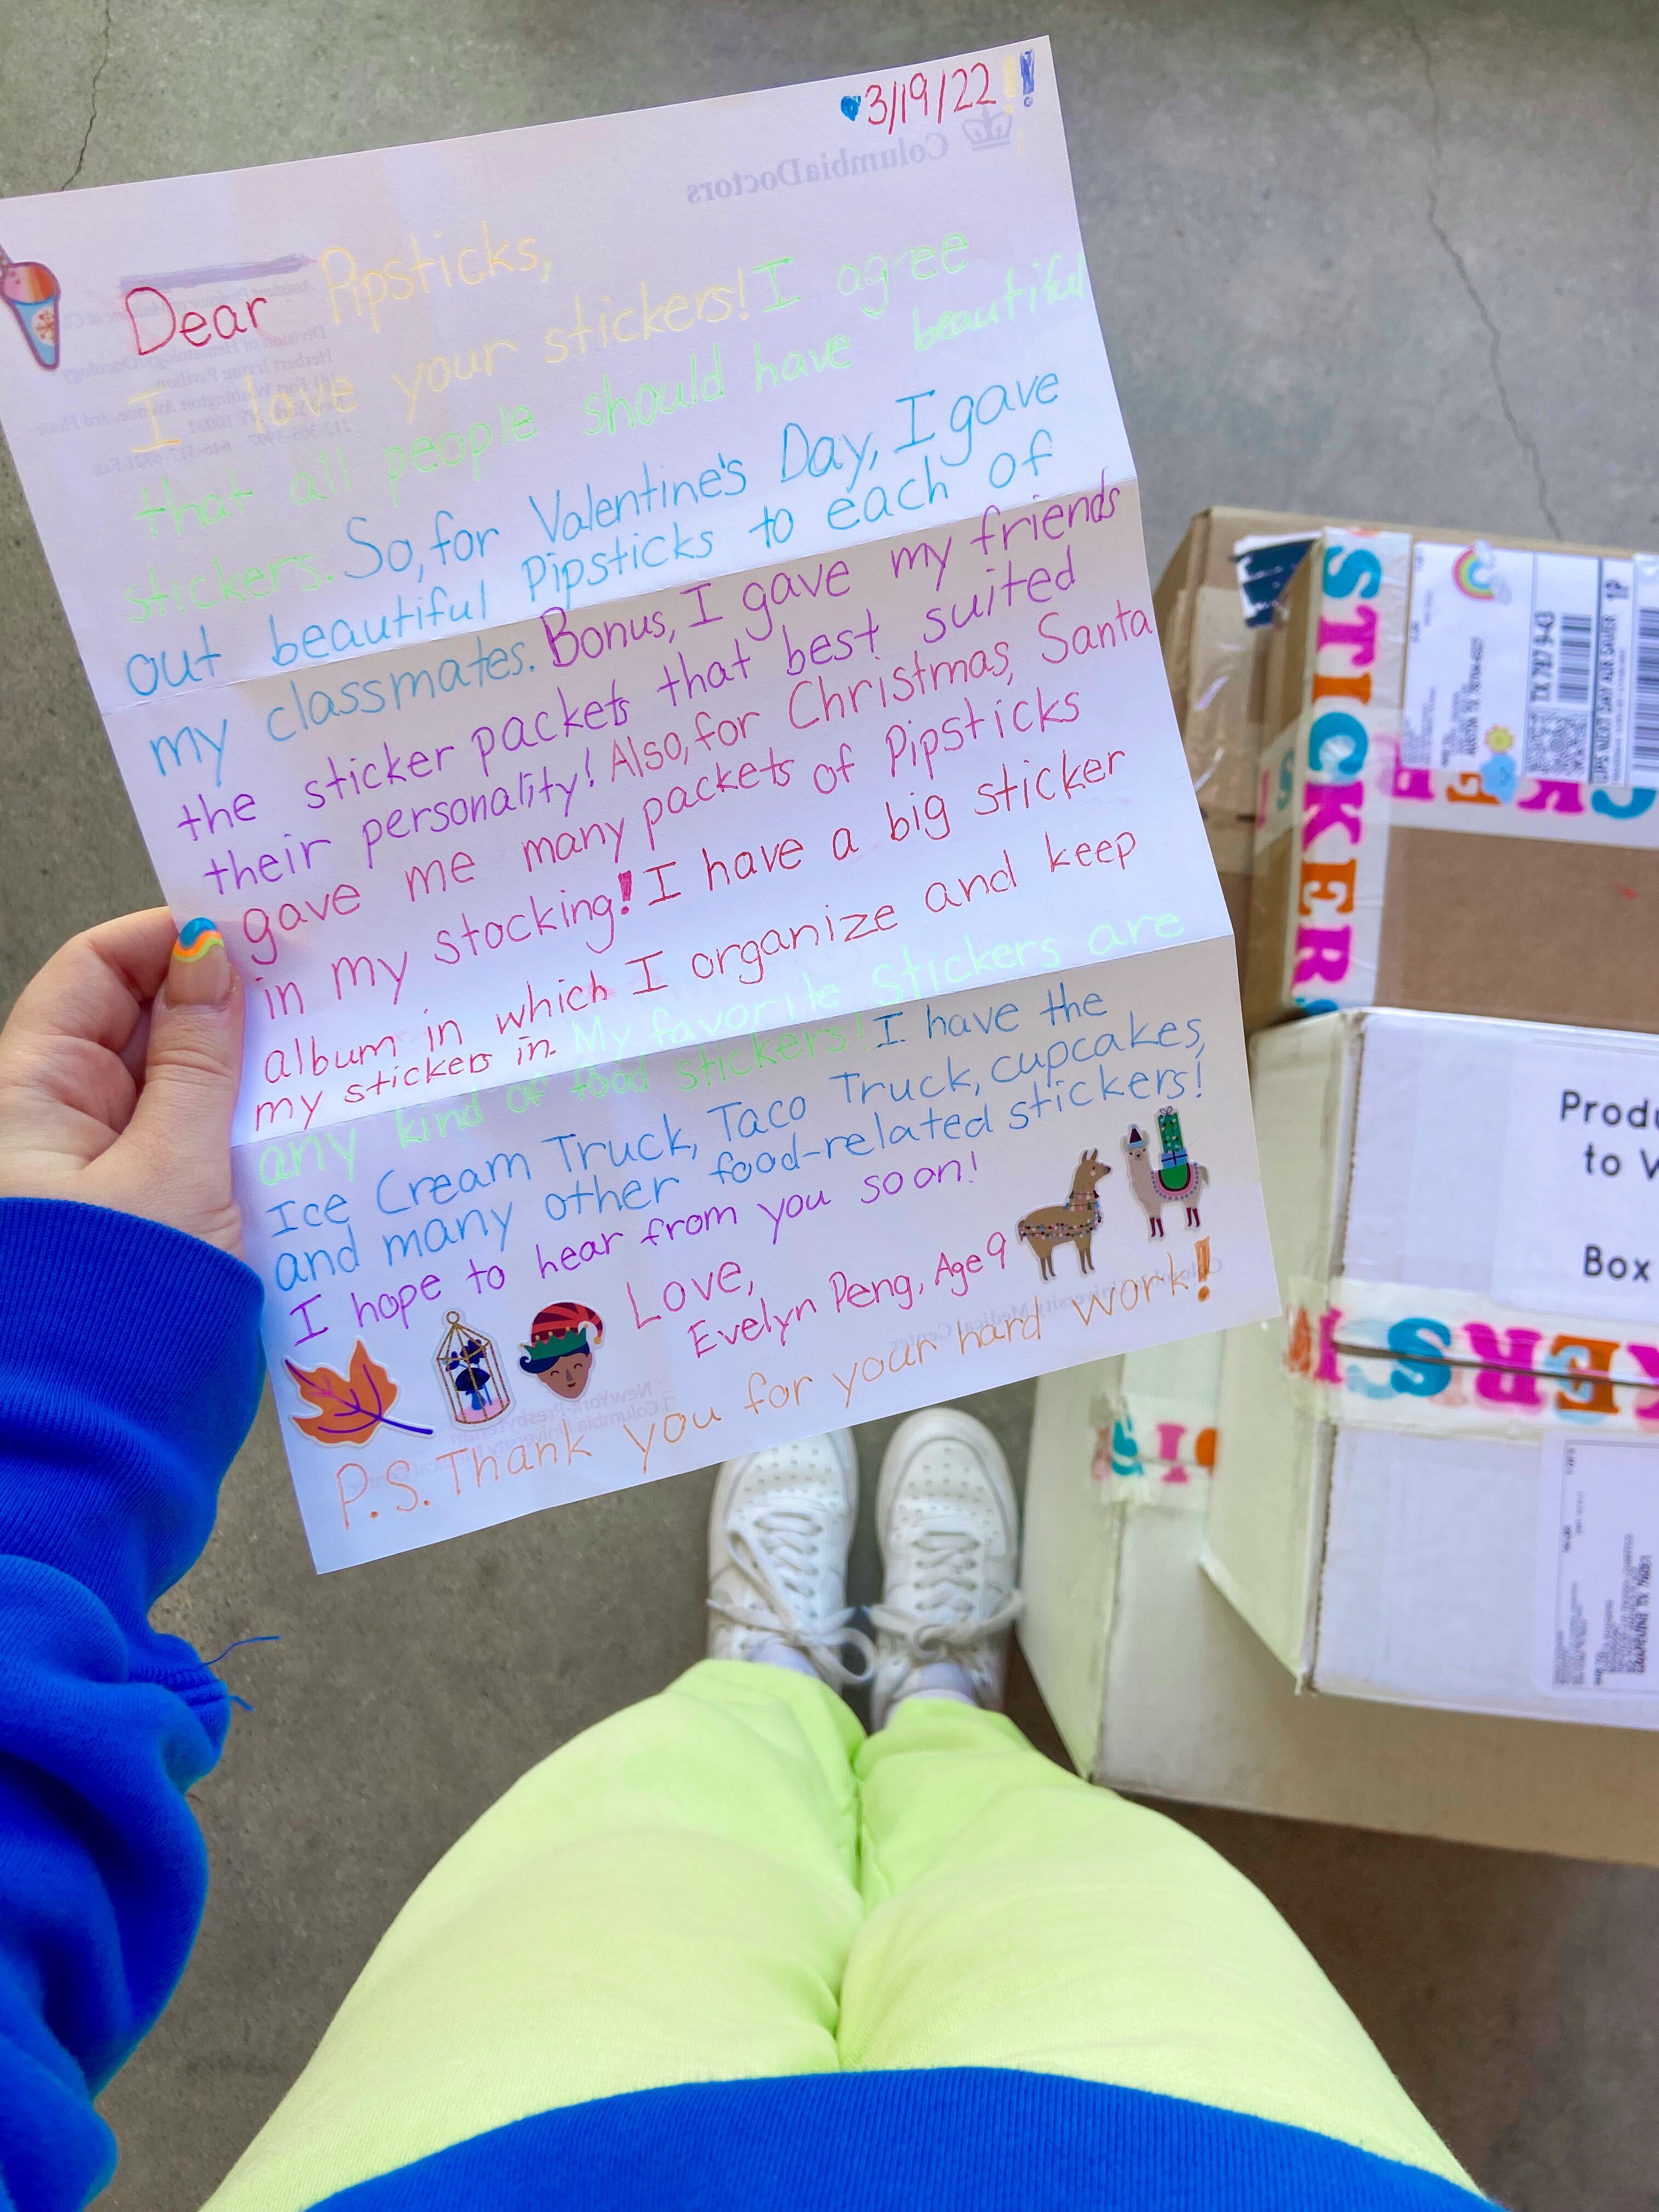 Fan Mail Friday: “All people should have beautiful stickers”